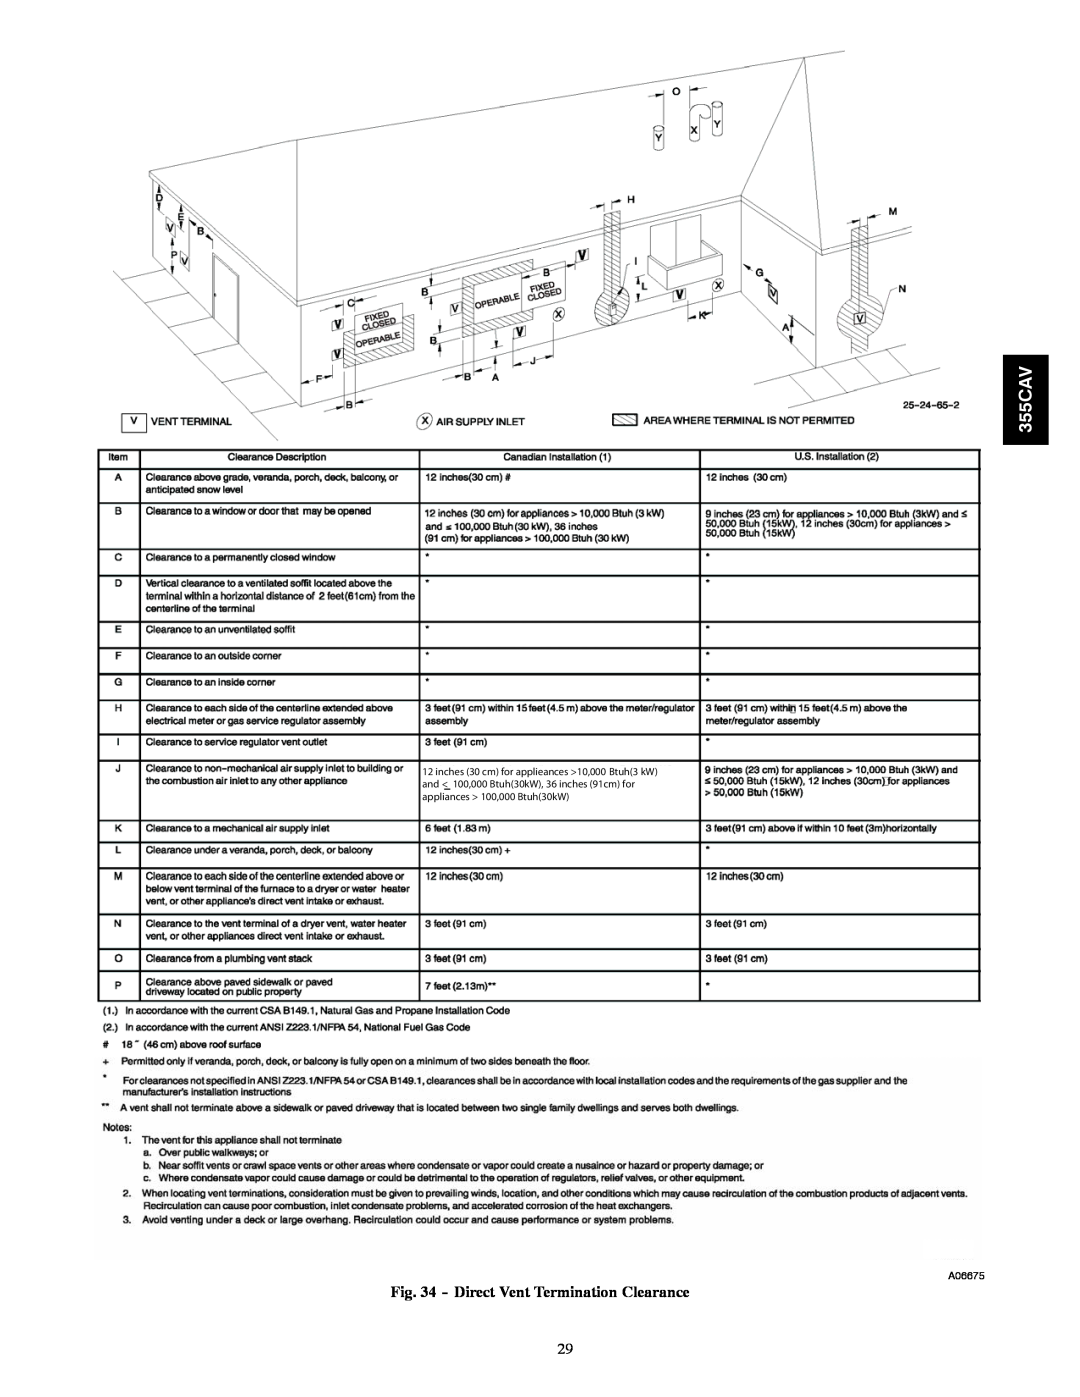 Bryant 355CAV installation instructions Direct Vent Termination Clearance, A06675 